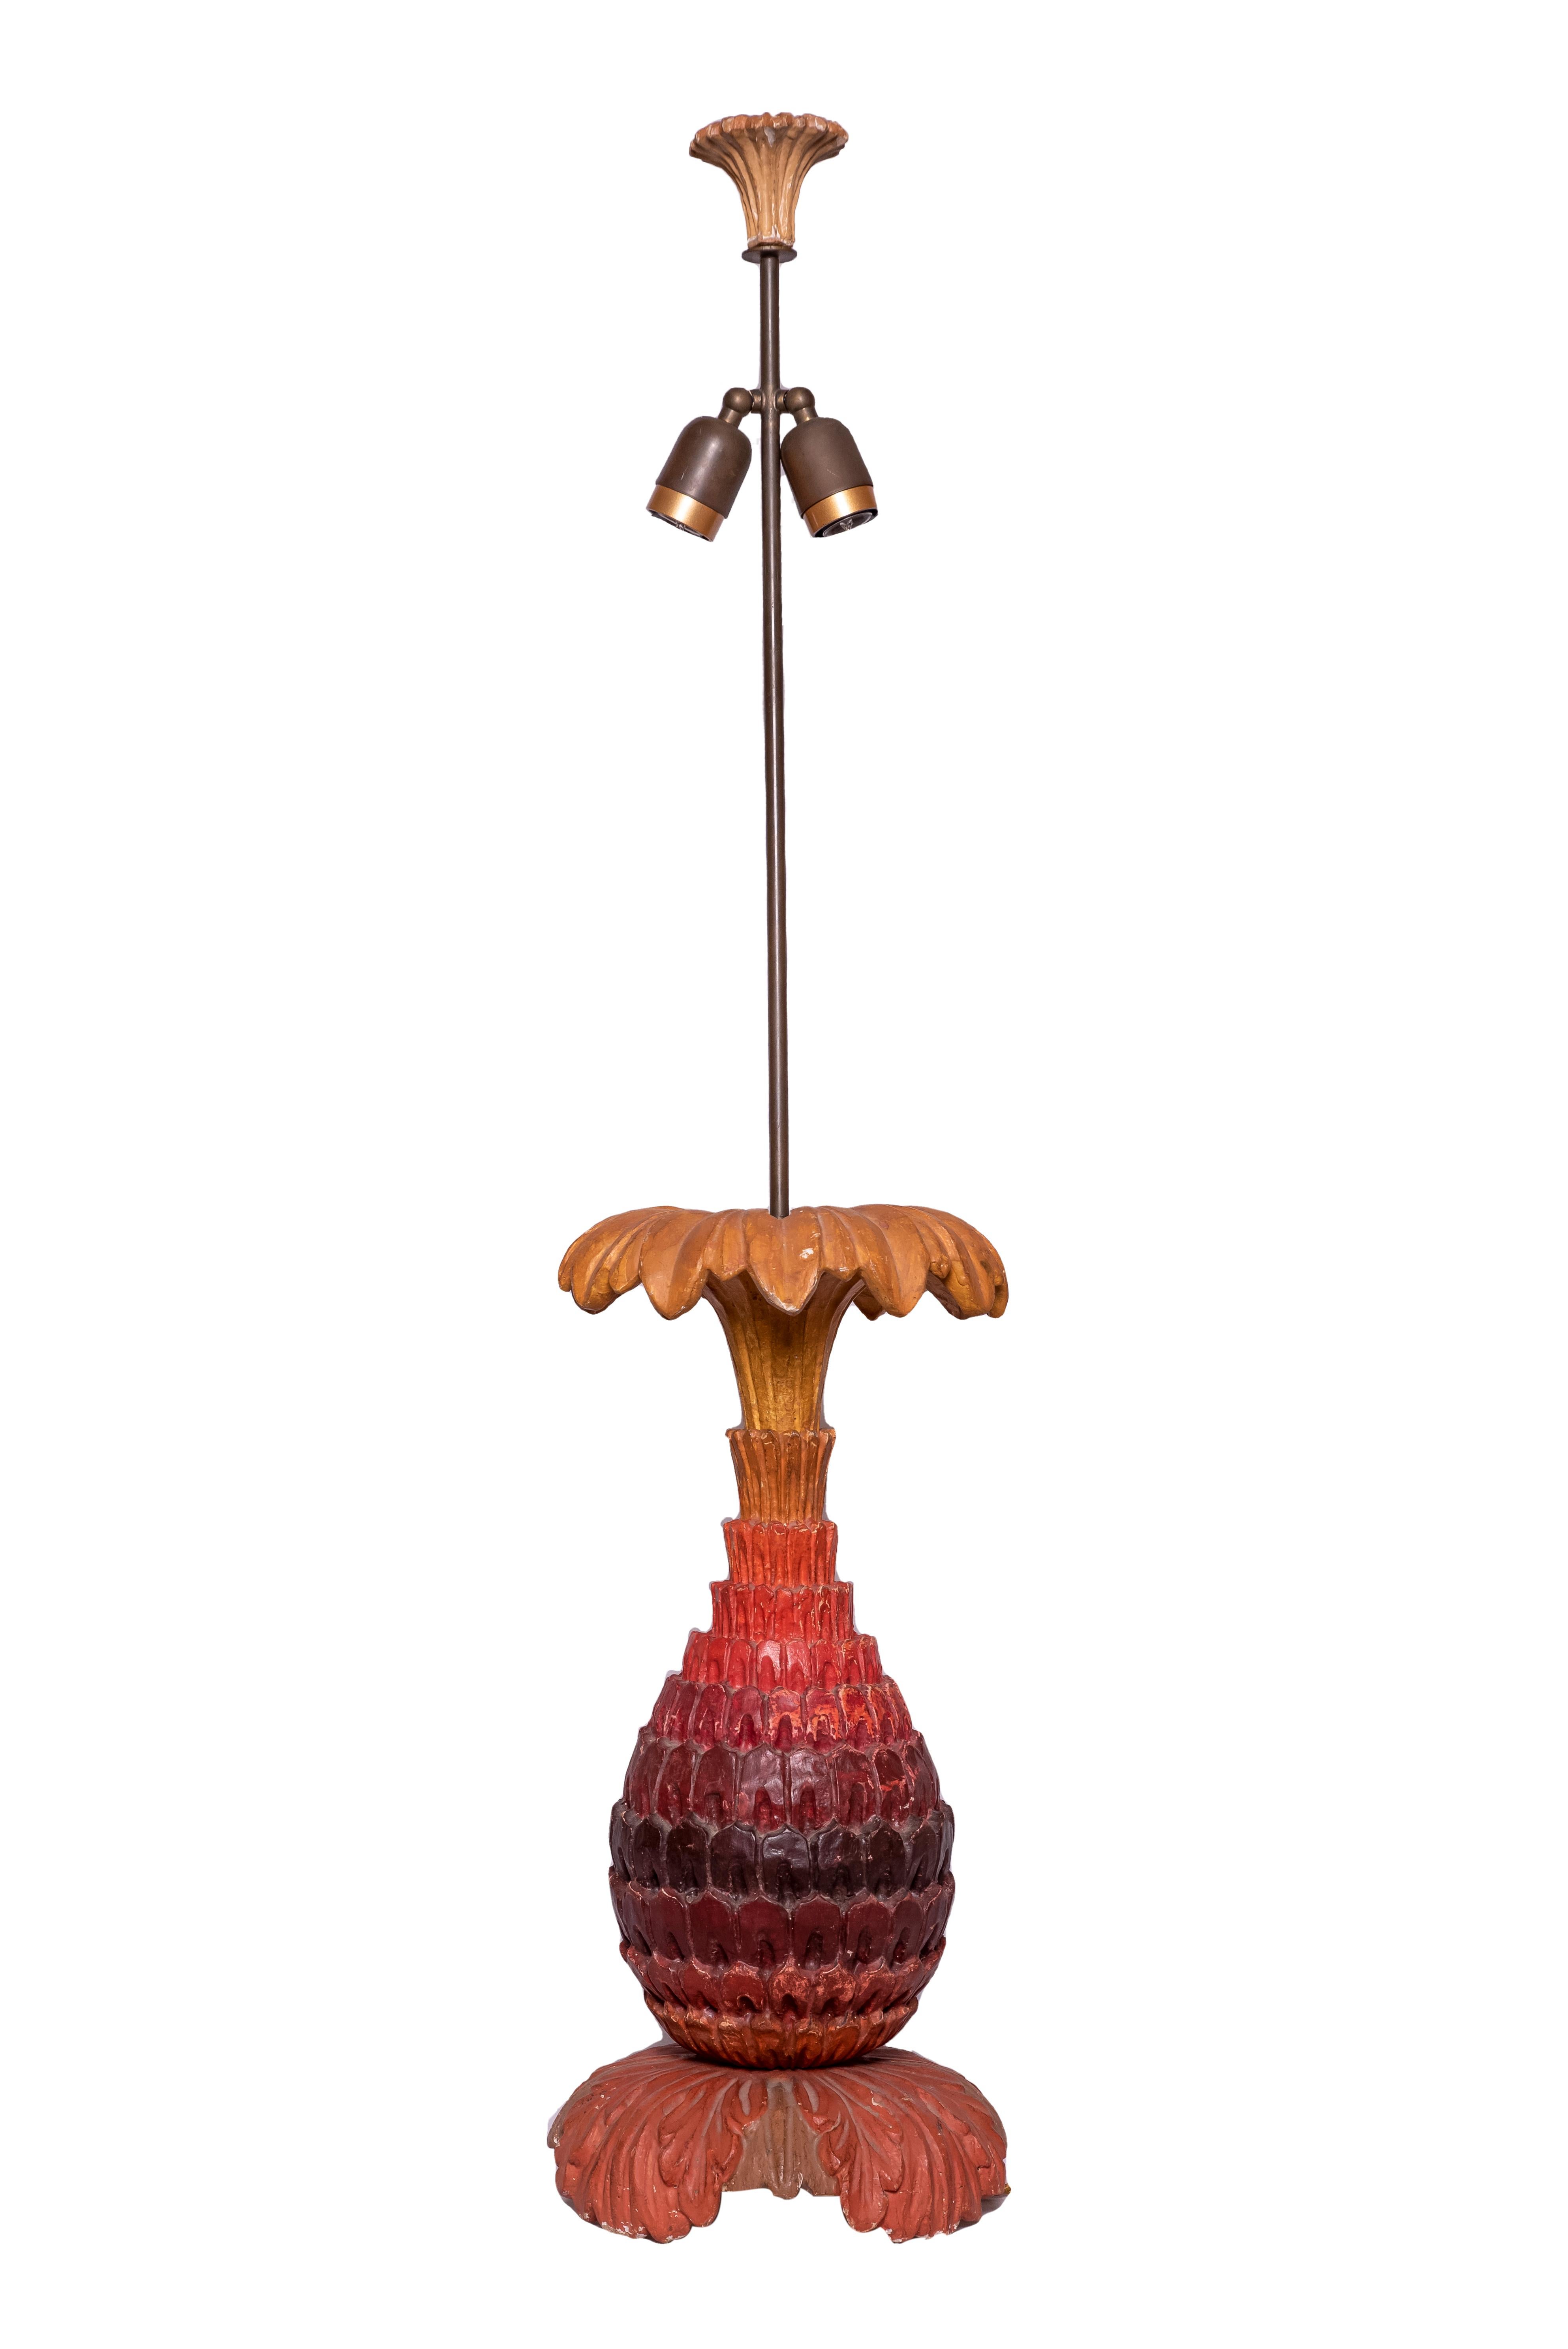 French red-orange painted wood carved pineapple table lamp by Maison Jansen. With circular white cotton shade.